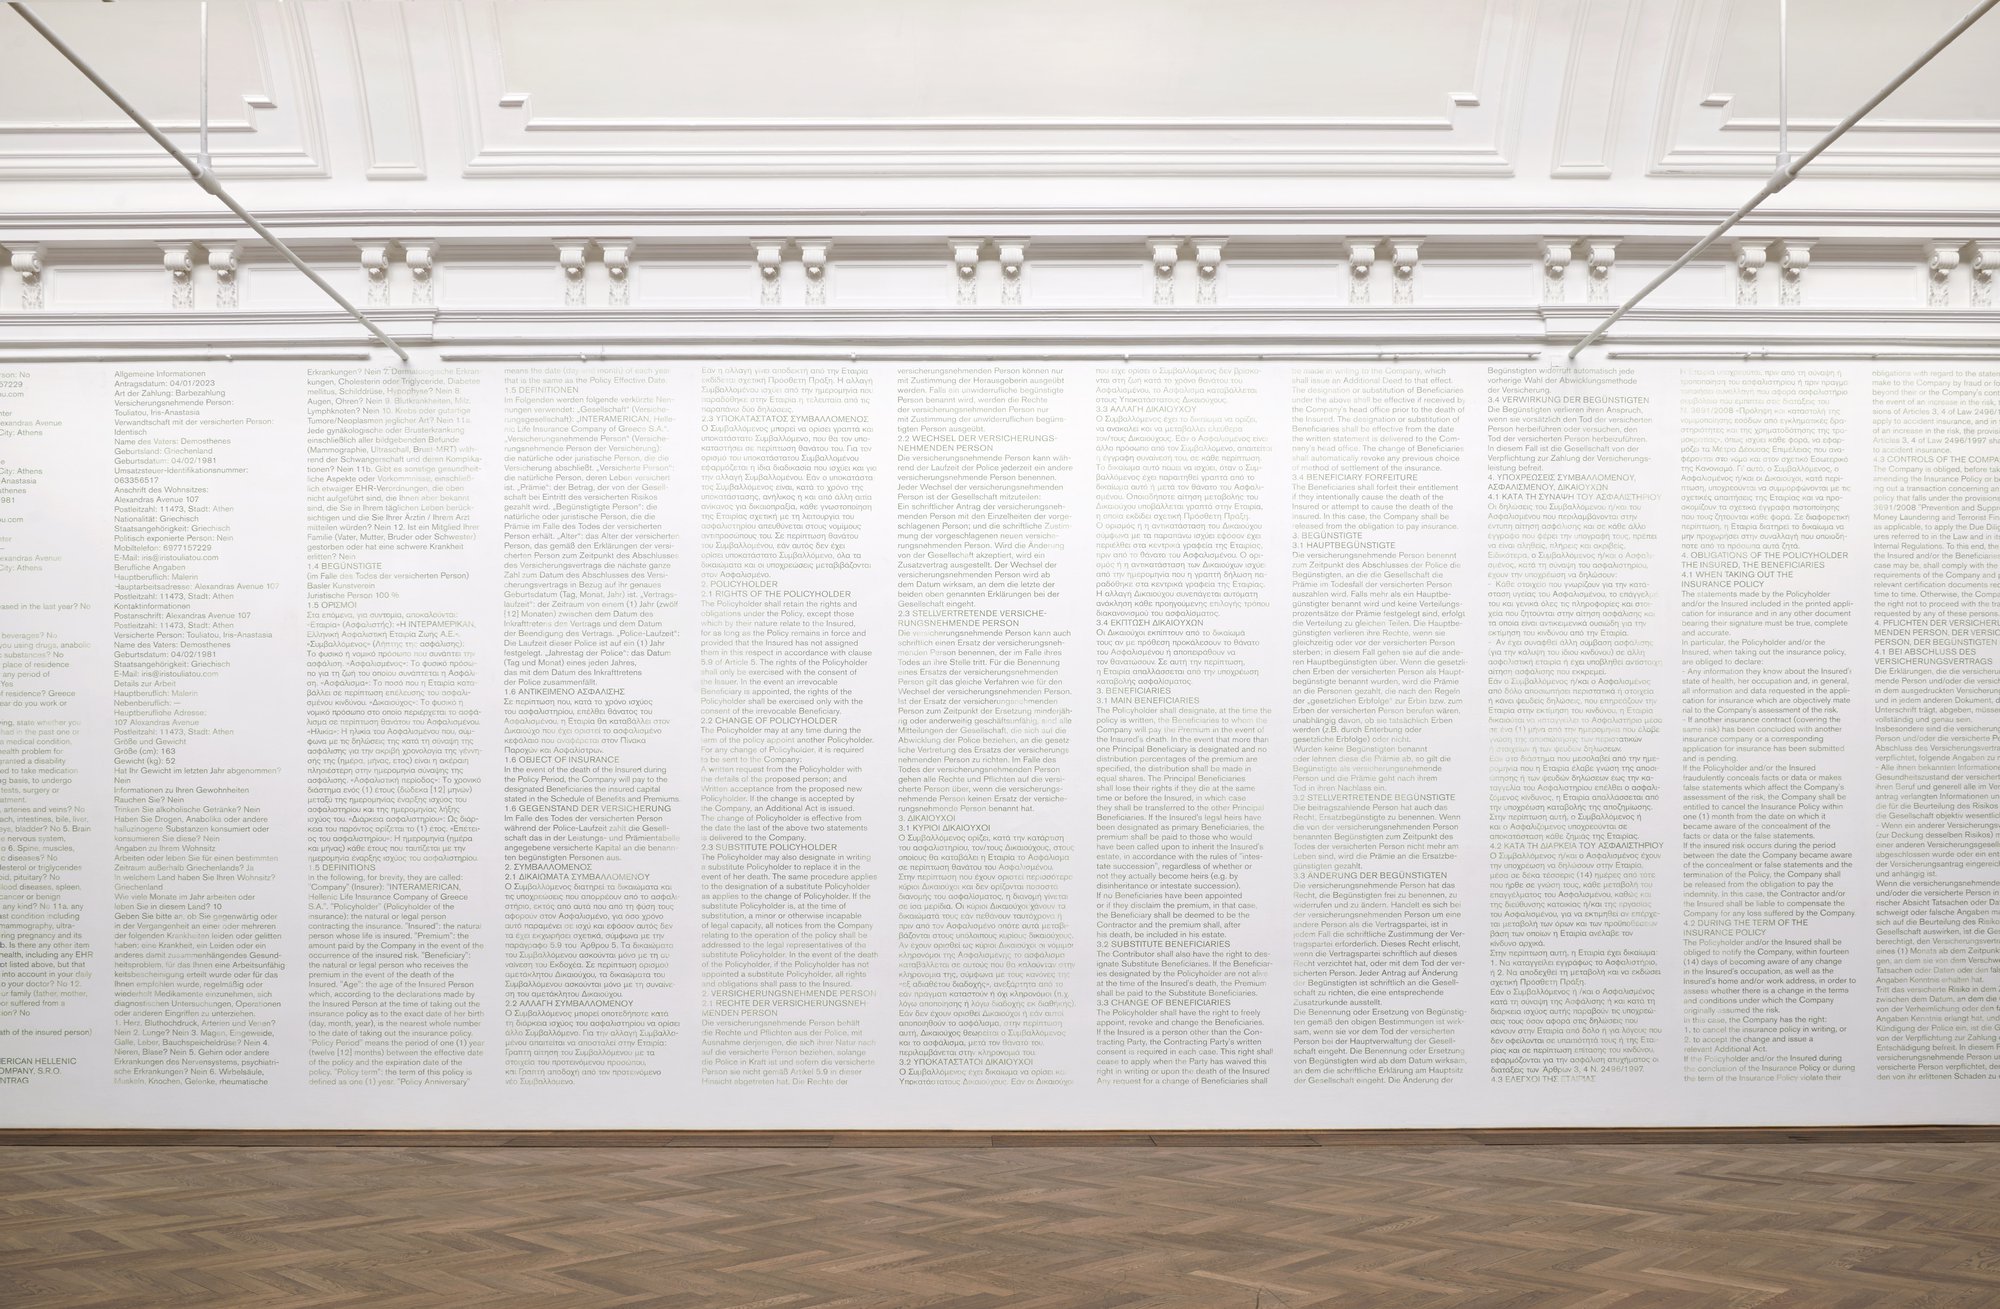 Iris Touliatou, SCORE FOR COVERAGE, Simple Annual Life Insurance (391), policy number 01729973 Graphic design by Typical. Organization for Standards &amp; Order, 2023.Installation view, Iris Touliatou, GIFT, Kunsthalle Basel, Basel, 2023.